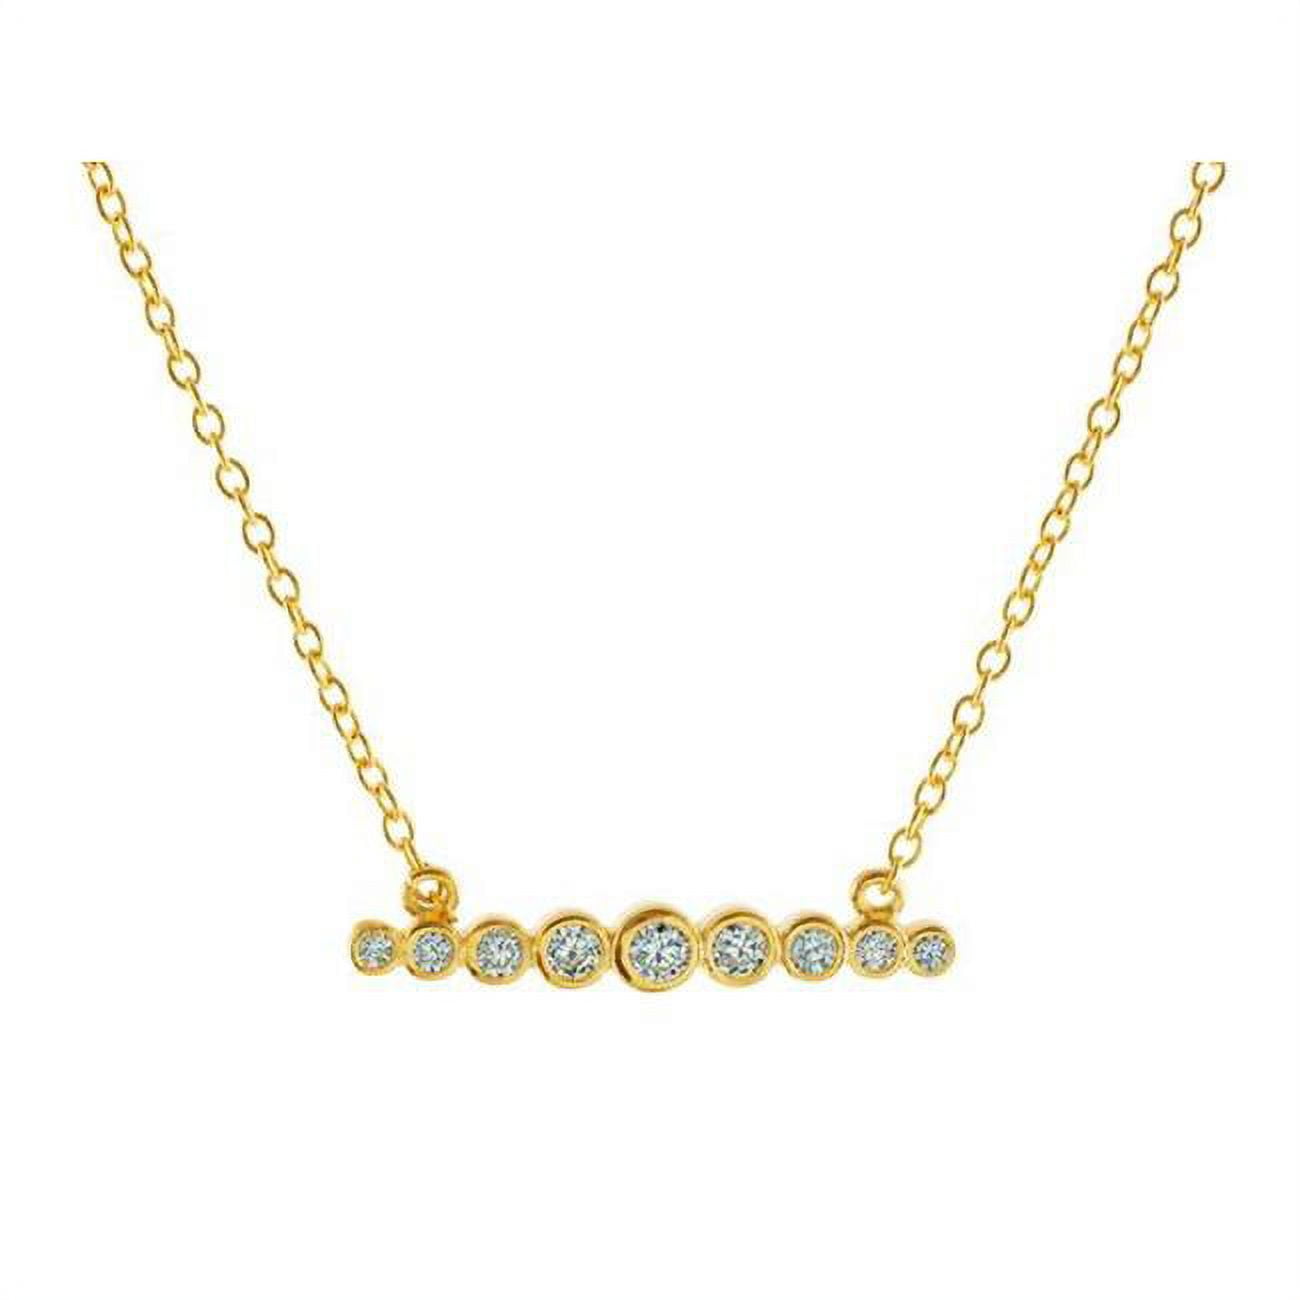 15.5 In. Plus 2 In. Extension 18k Gold Plated Cubic Zirconia Degrade Bar Necklace